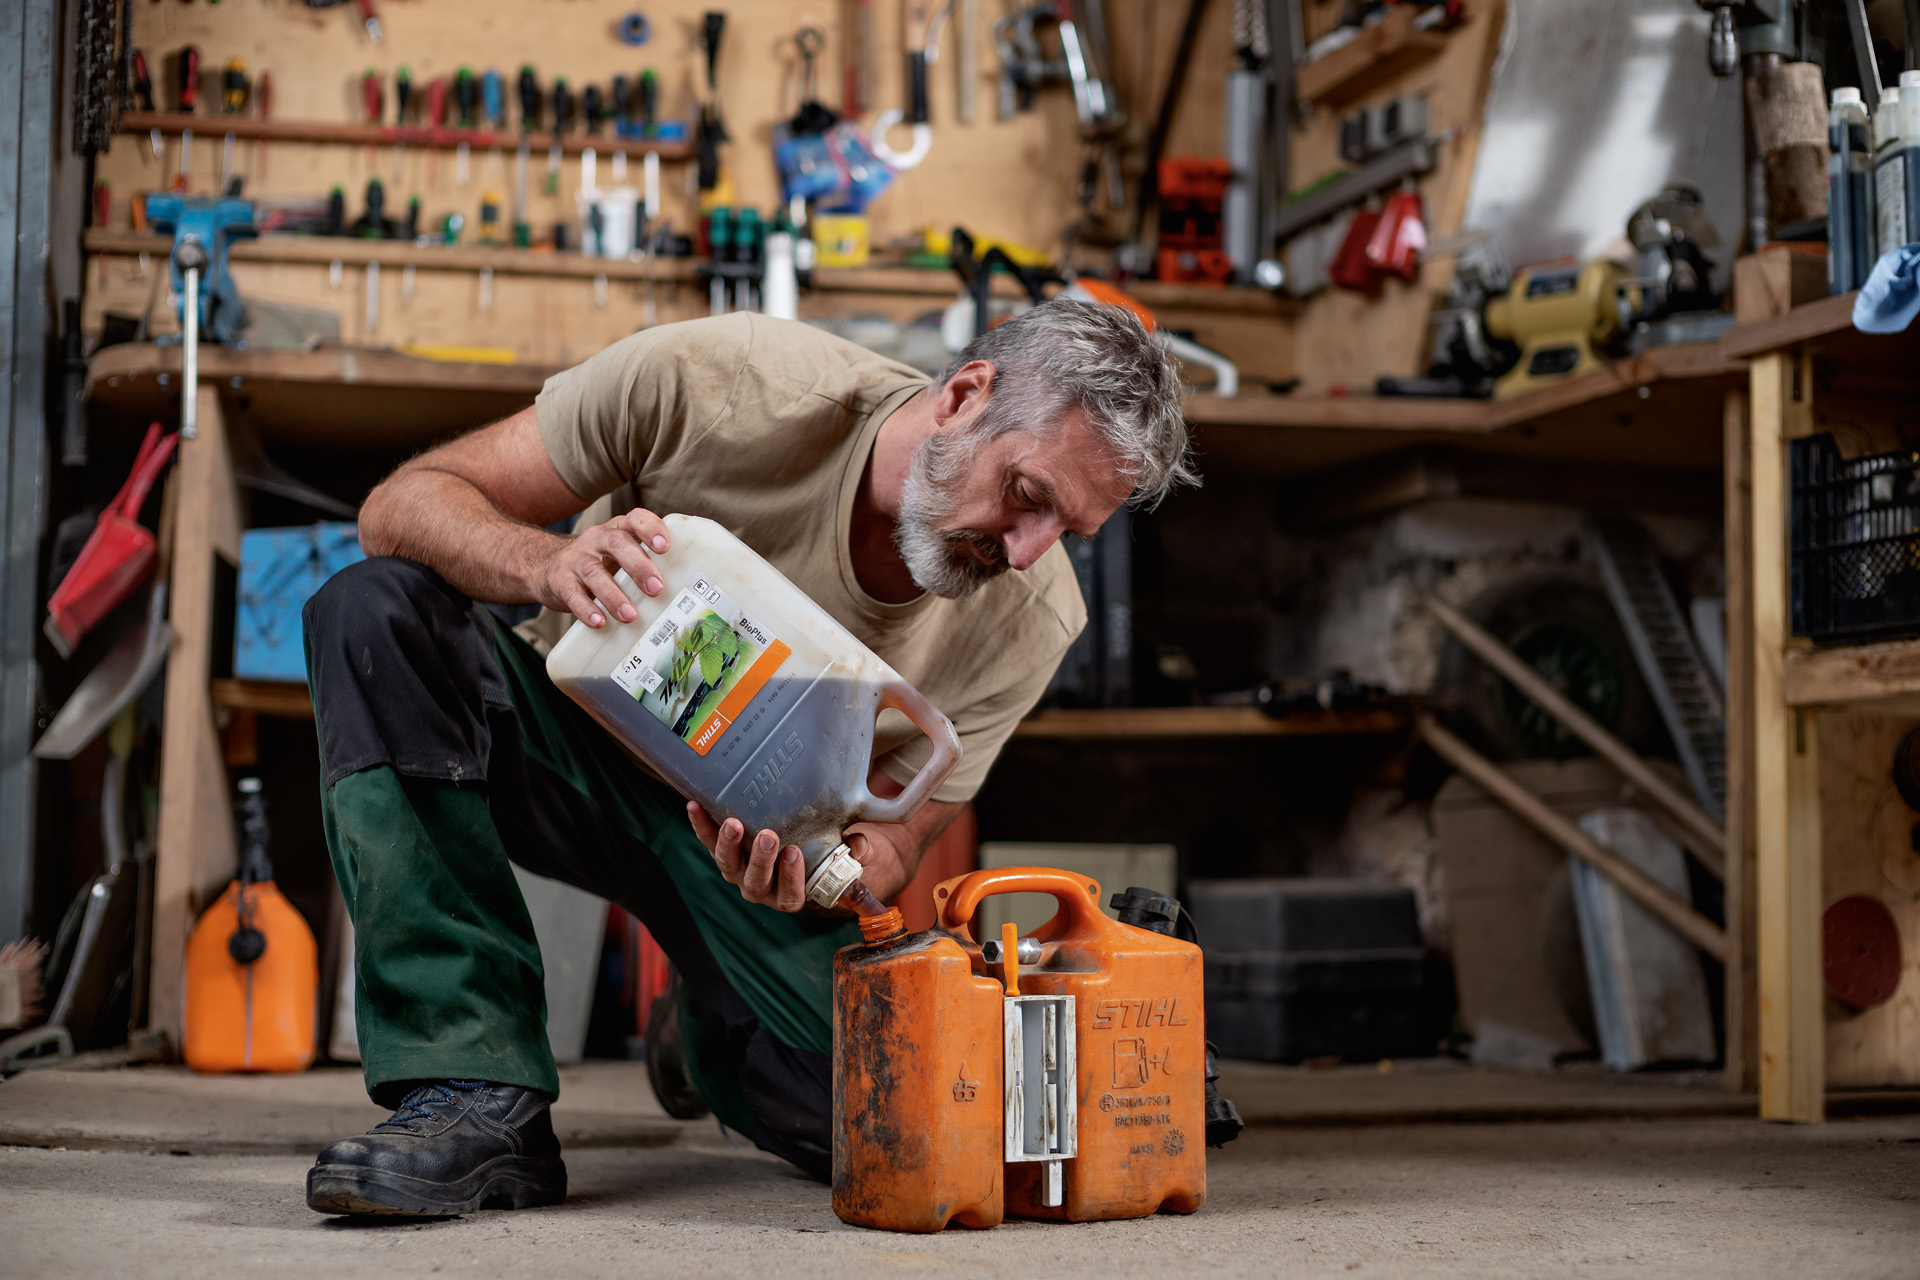 Man kneeling on the floor and filling STIHL fuel into an orange canister